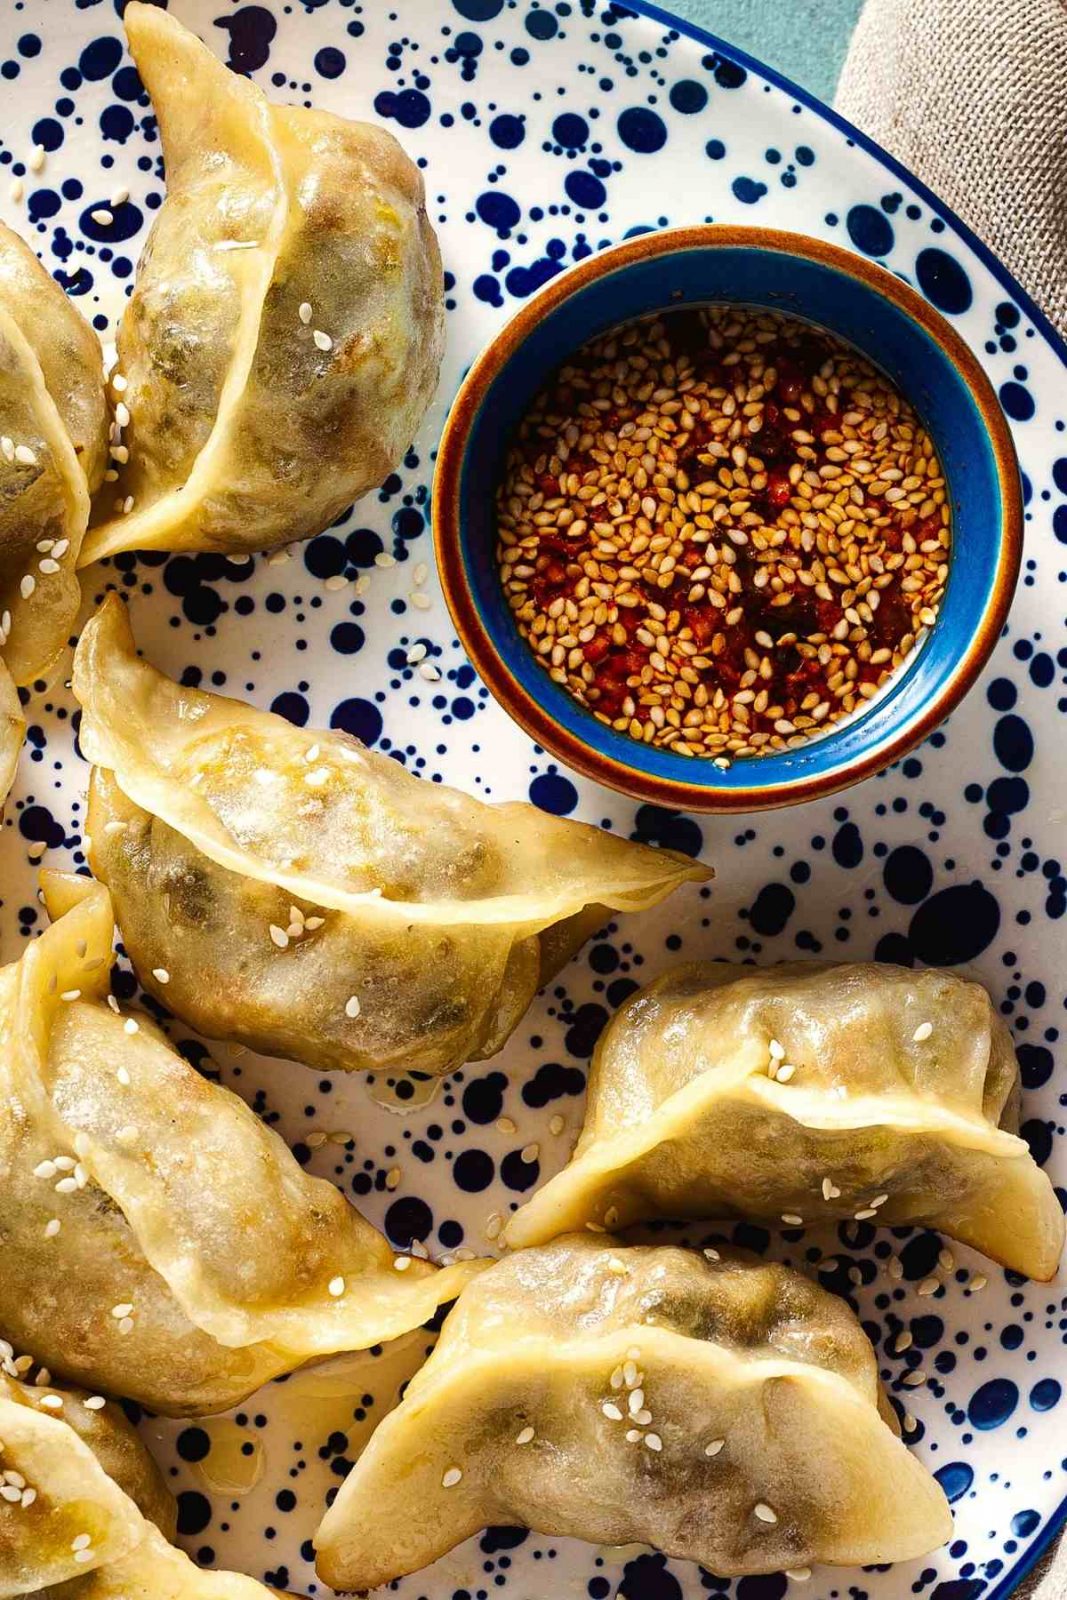 If you love Chinese dumplings, you'll know that the only way to make them even more irresistible is to serve them with an incredible dipping sauce. However, not every dipping sauce can do the trick. Luckily, we’ve tracked down the best dipping sauce recipe to ensure your dumplings get the sauce they deserve.